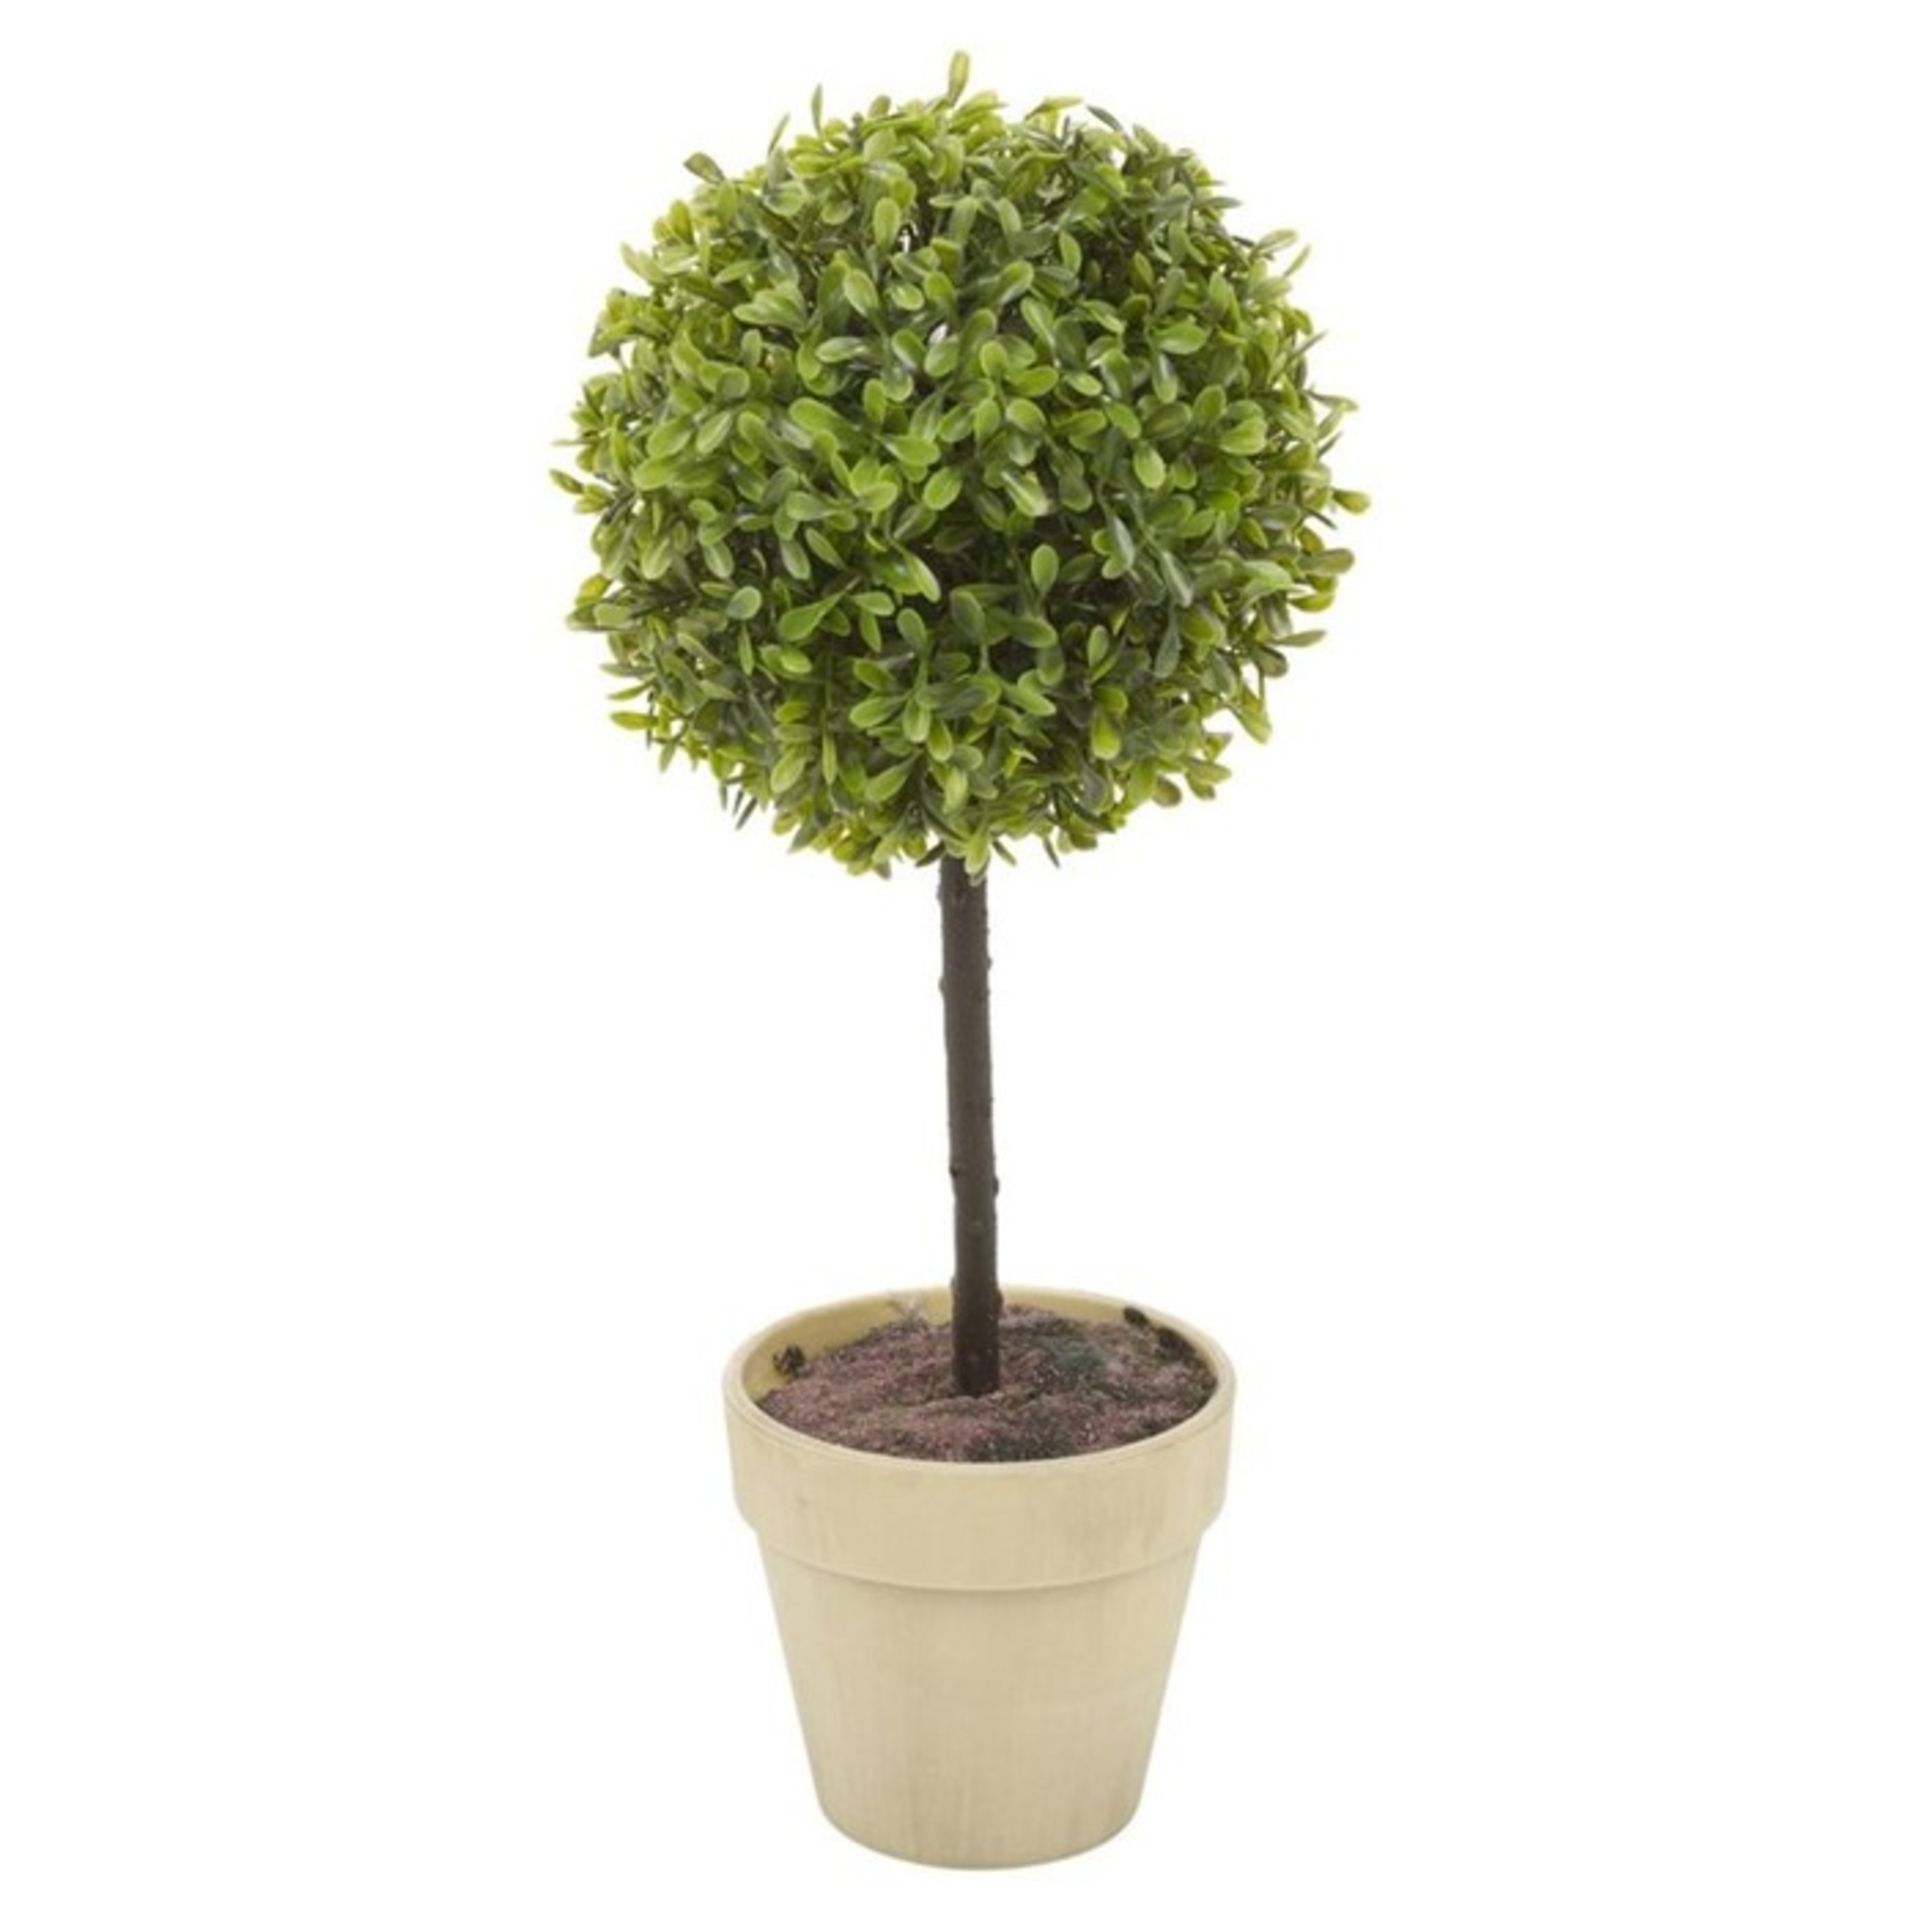 Brambly Cottage Artificial Boxwood Plant in Planter (WLDK3654 - 13671/39) 2I